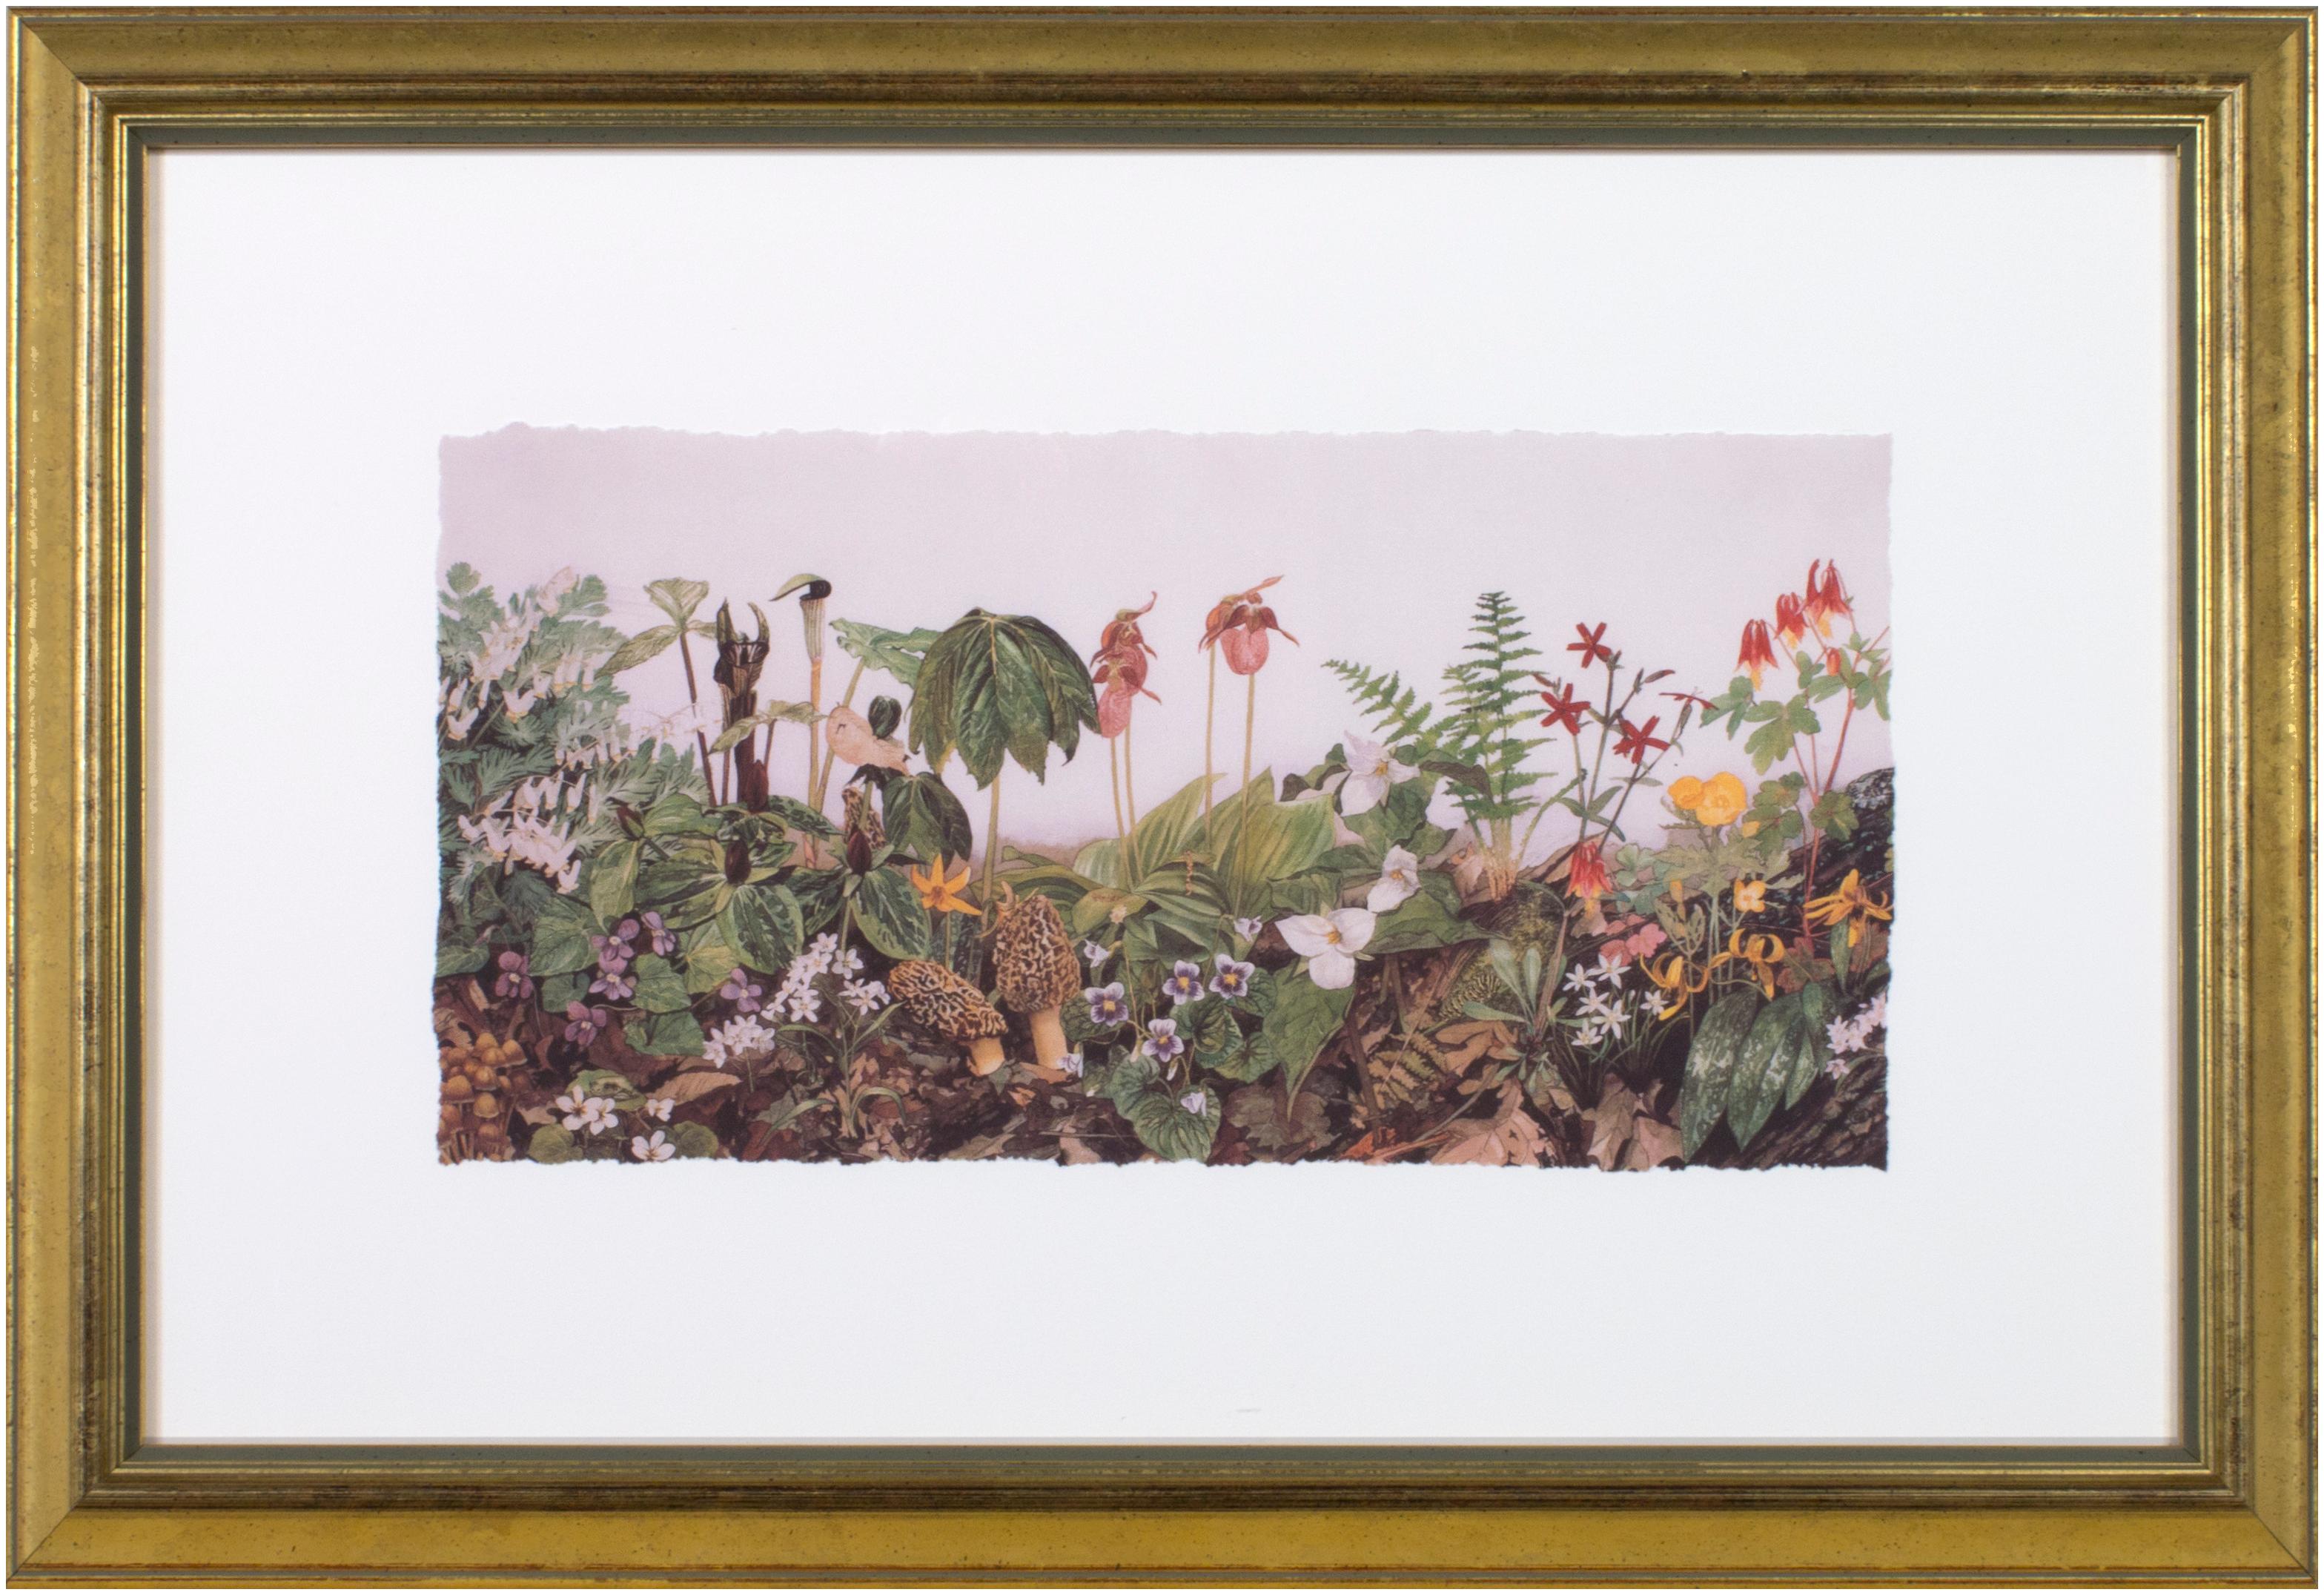 Deb Wright Landscape Print - 'Spring Wildflowers' giclée print on watercolor paper after original painting